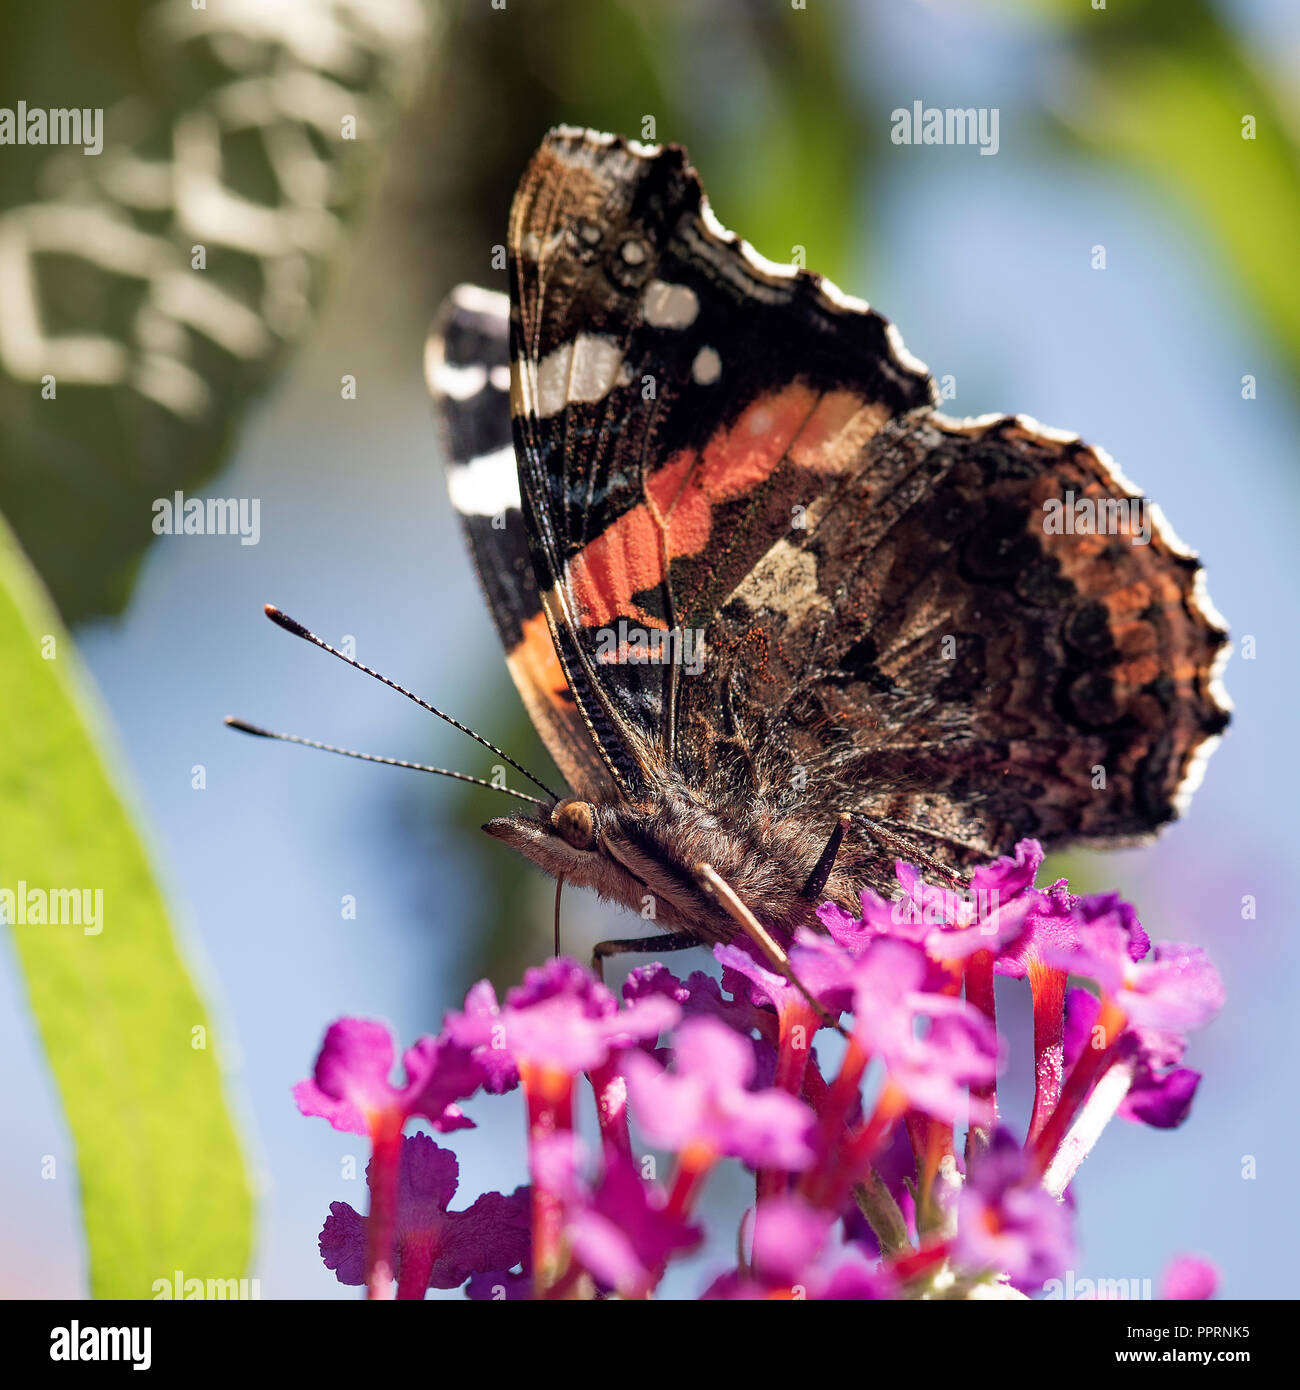 A Red Admiral Butterfly Feeding on Nectar on a Purple Buddleia Flower in a Garden in Alsager Cheshire England United Kingdom UK Stock Photo